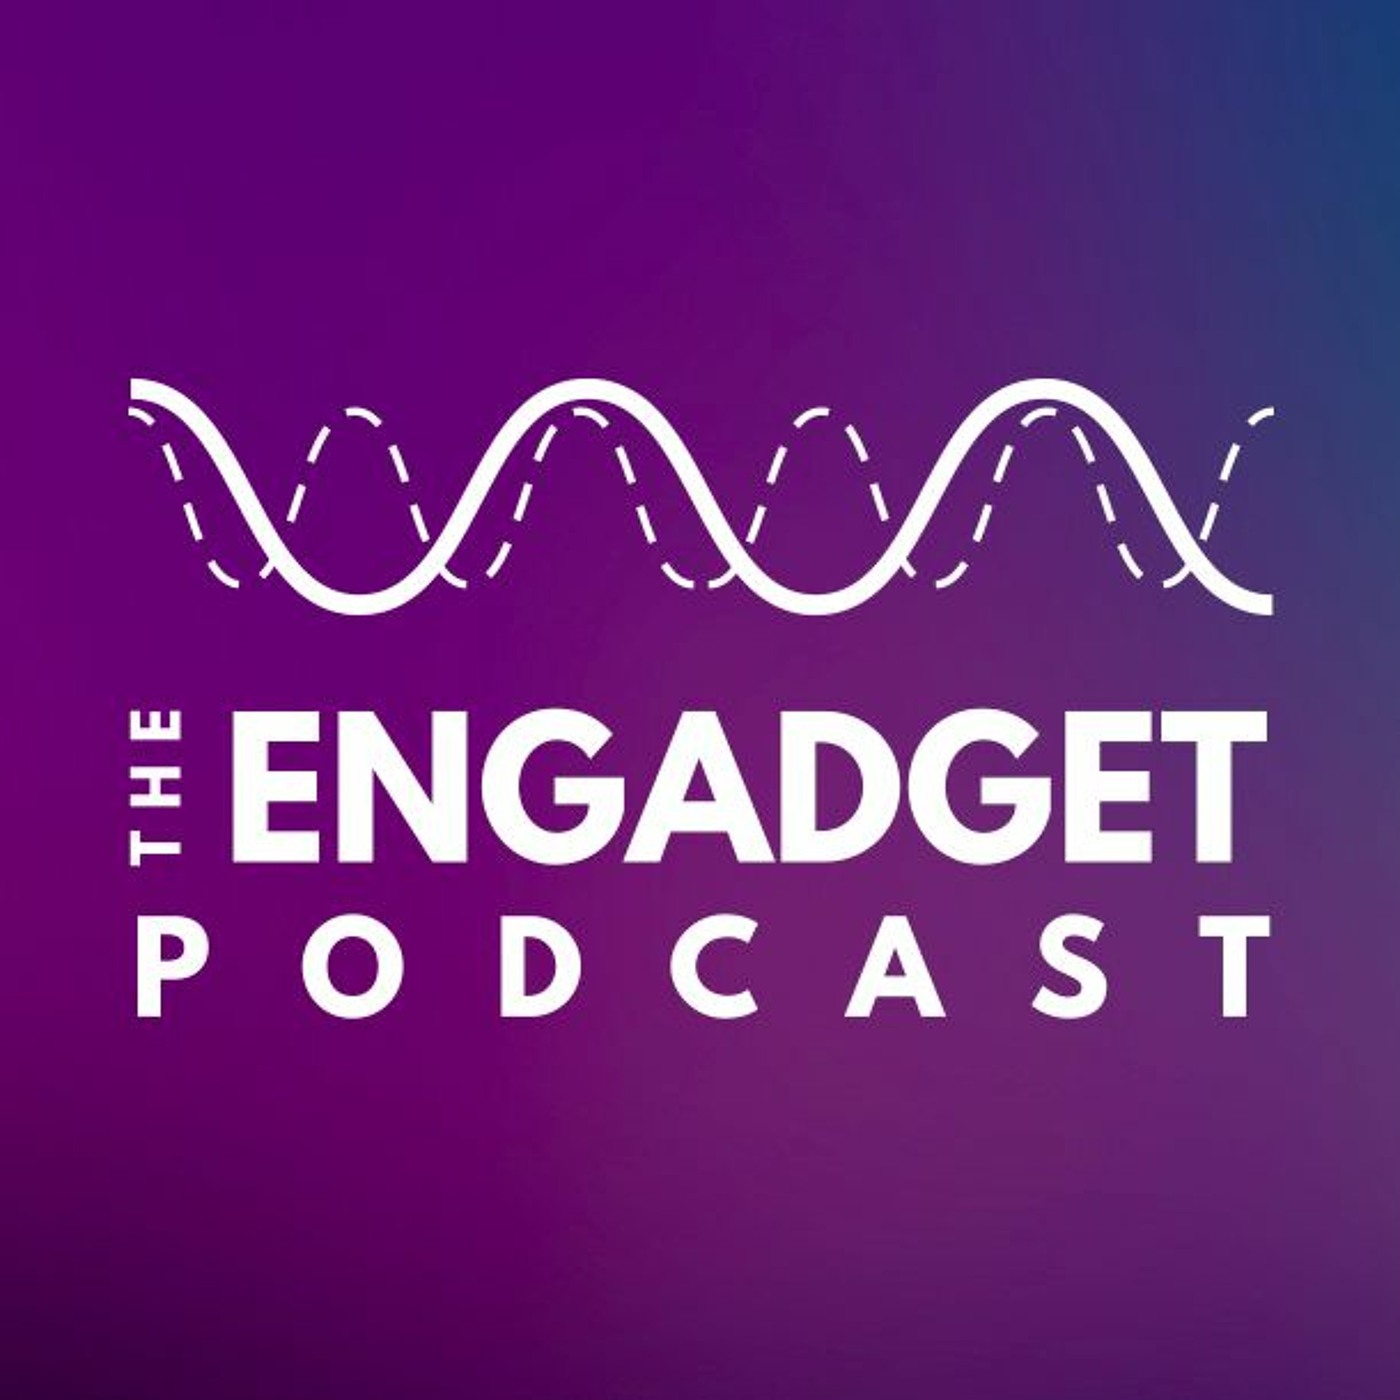 The Engadget Podcast Ep 25:  Black Hole Sun